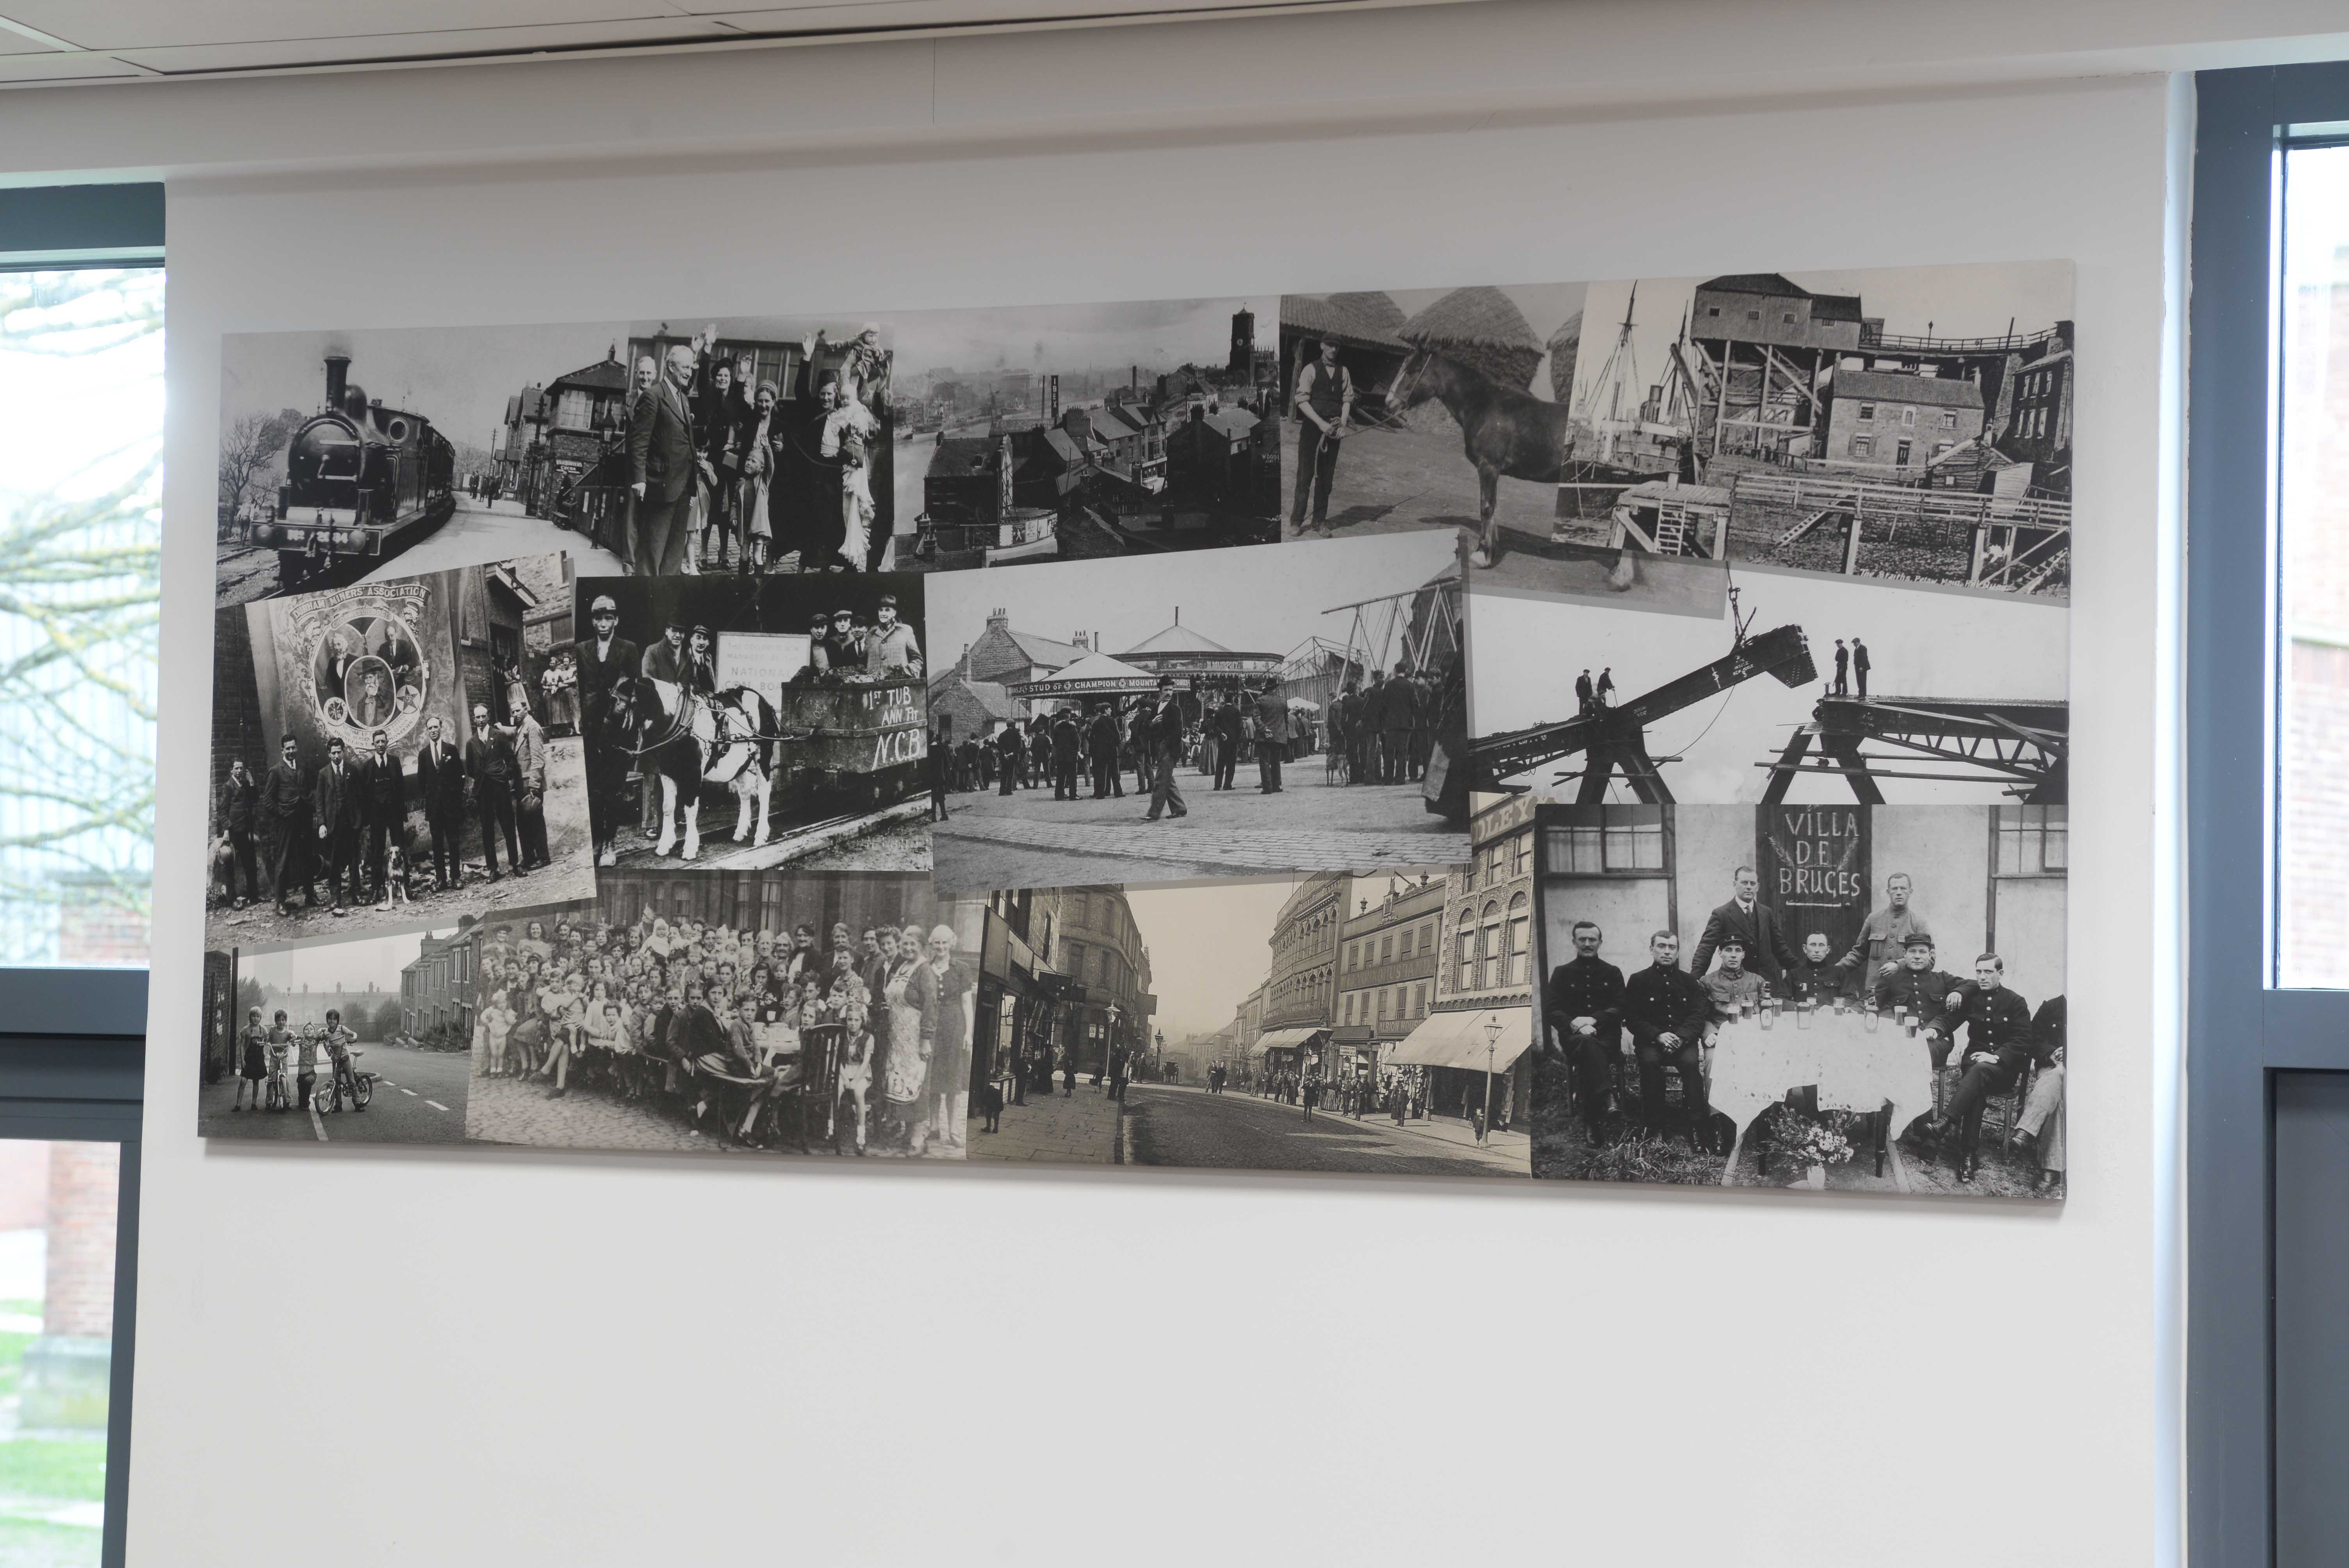 Reproductions of early photographs of Gateshead printed on canvas